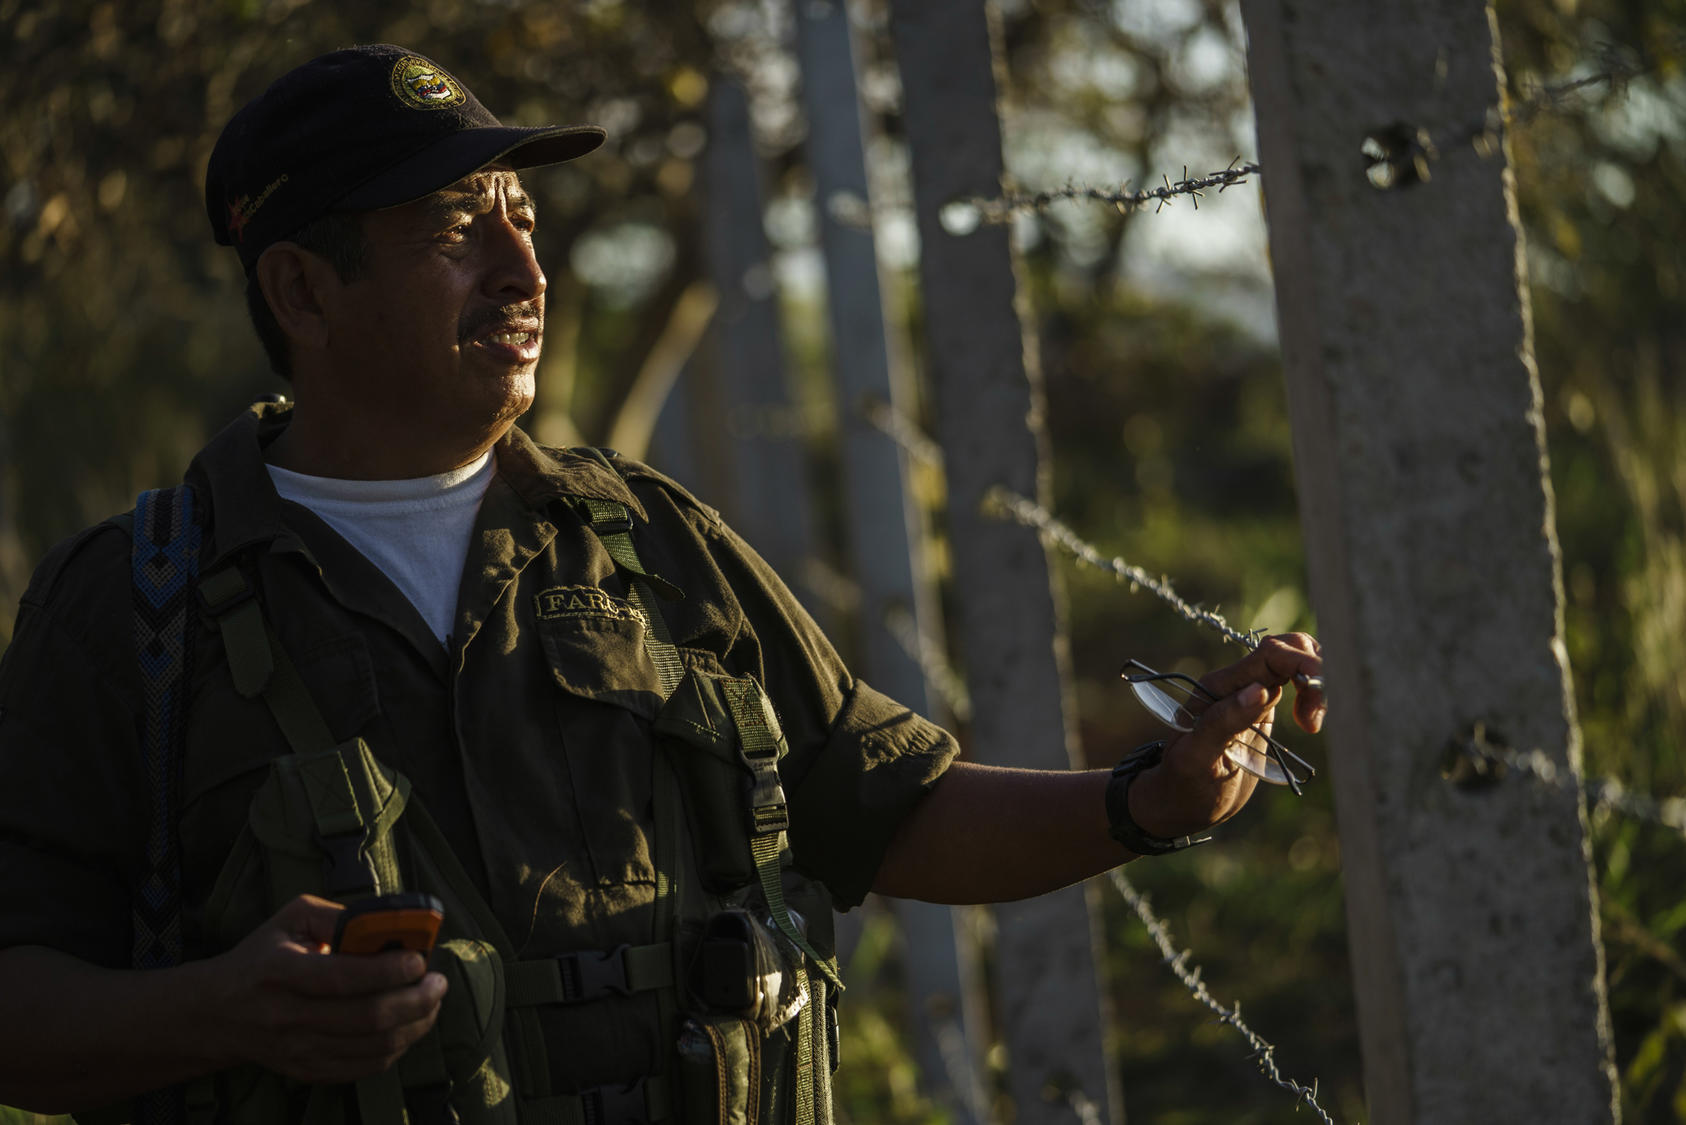 Aldemar Altamiranda, a commander of one group of FARC rebels now transitioning back to civilian life, near La Paz, Colombia, Feb. 1, 2017. Photo Courtesy of The New York Times /Federico Rios Escobar